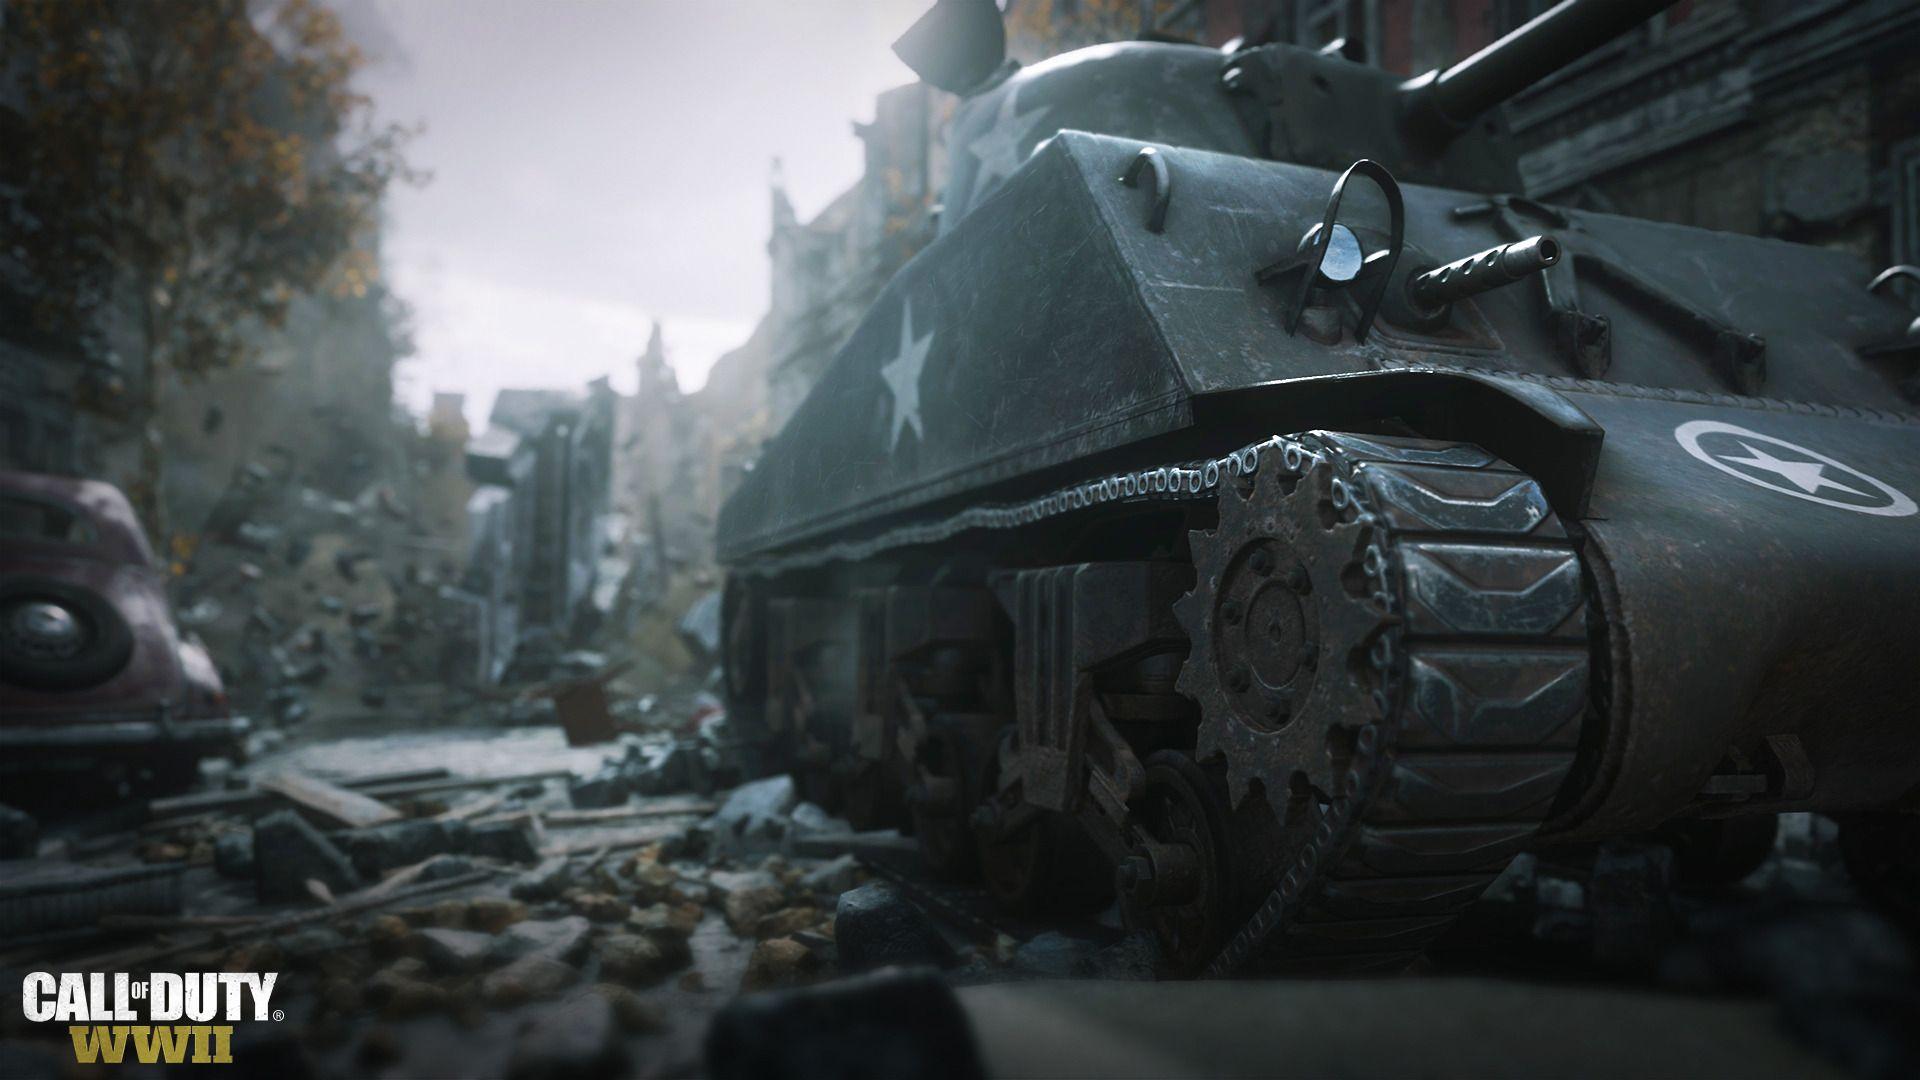 Call Of Duty Ww2 Tank, HD Games, 4k Wallpaper, Image, Background